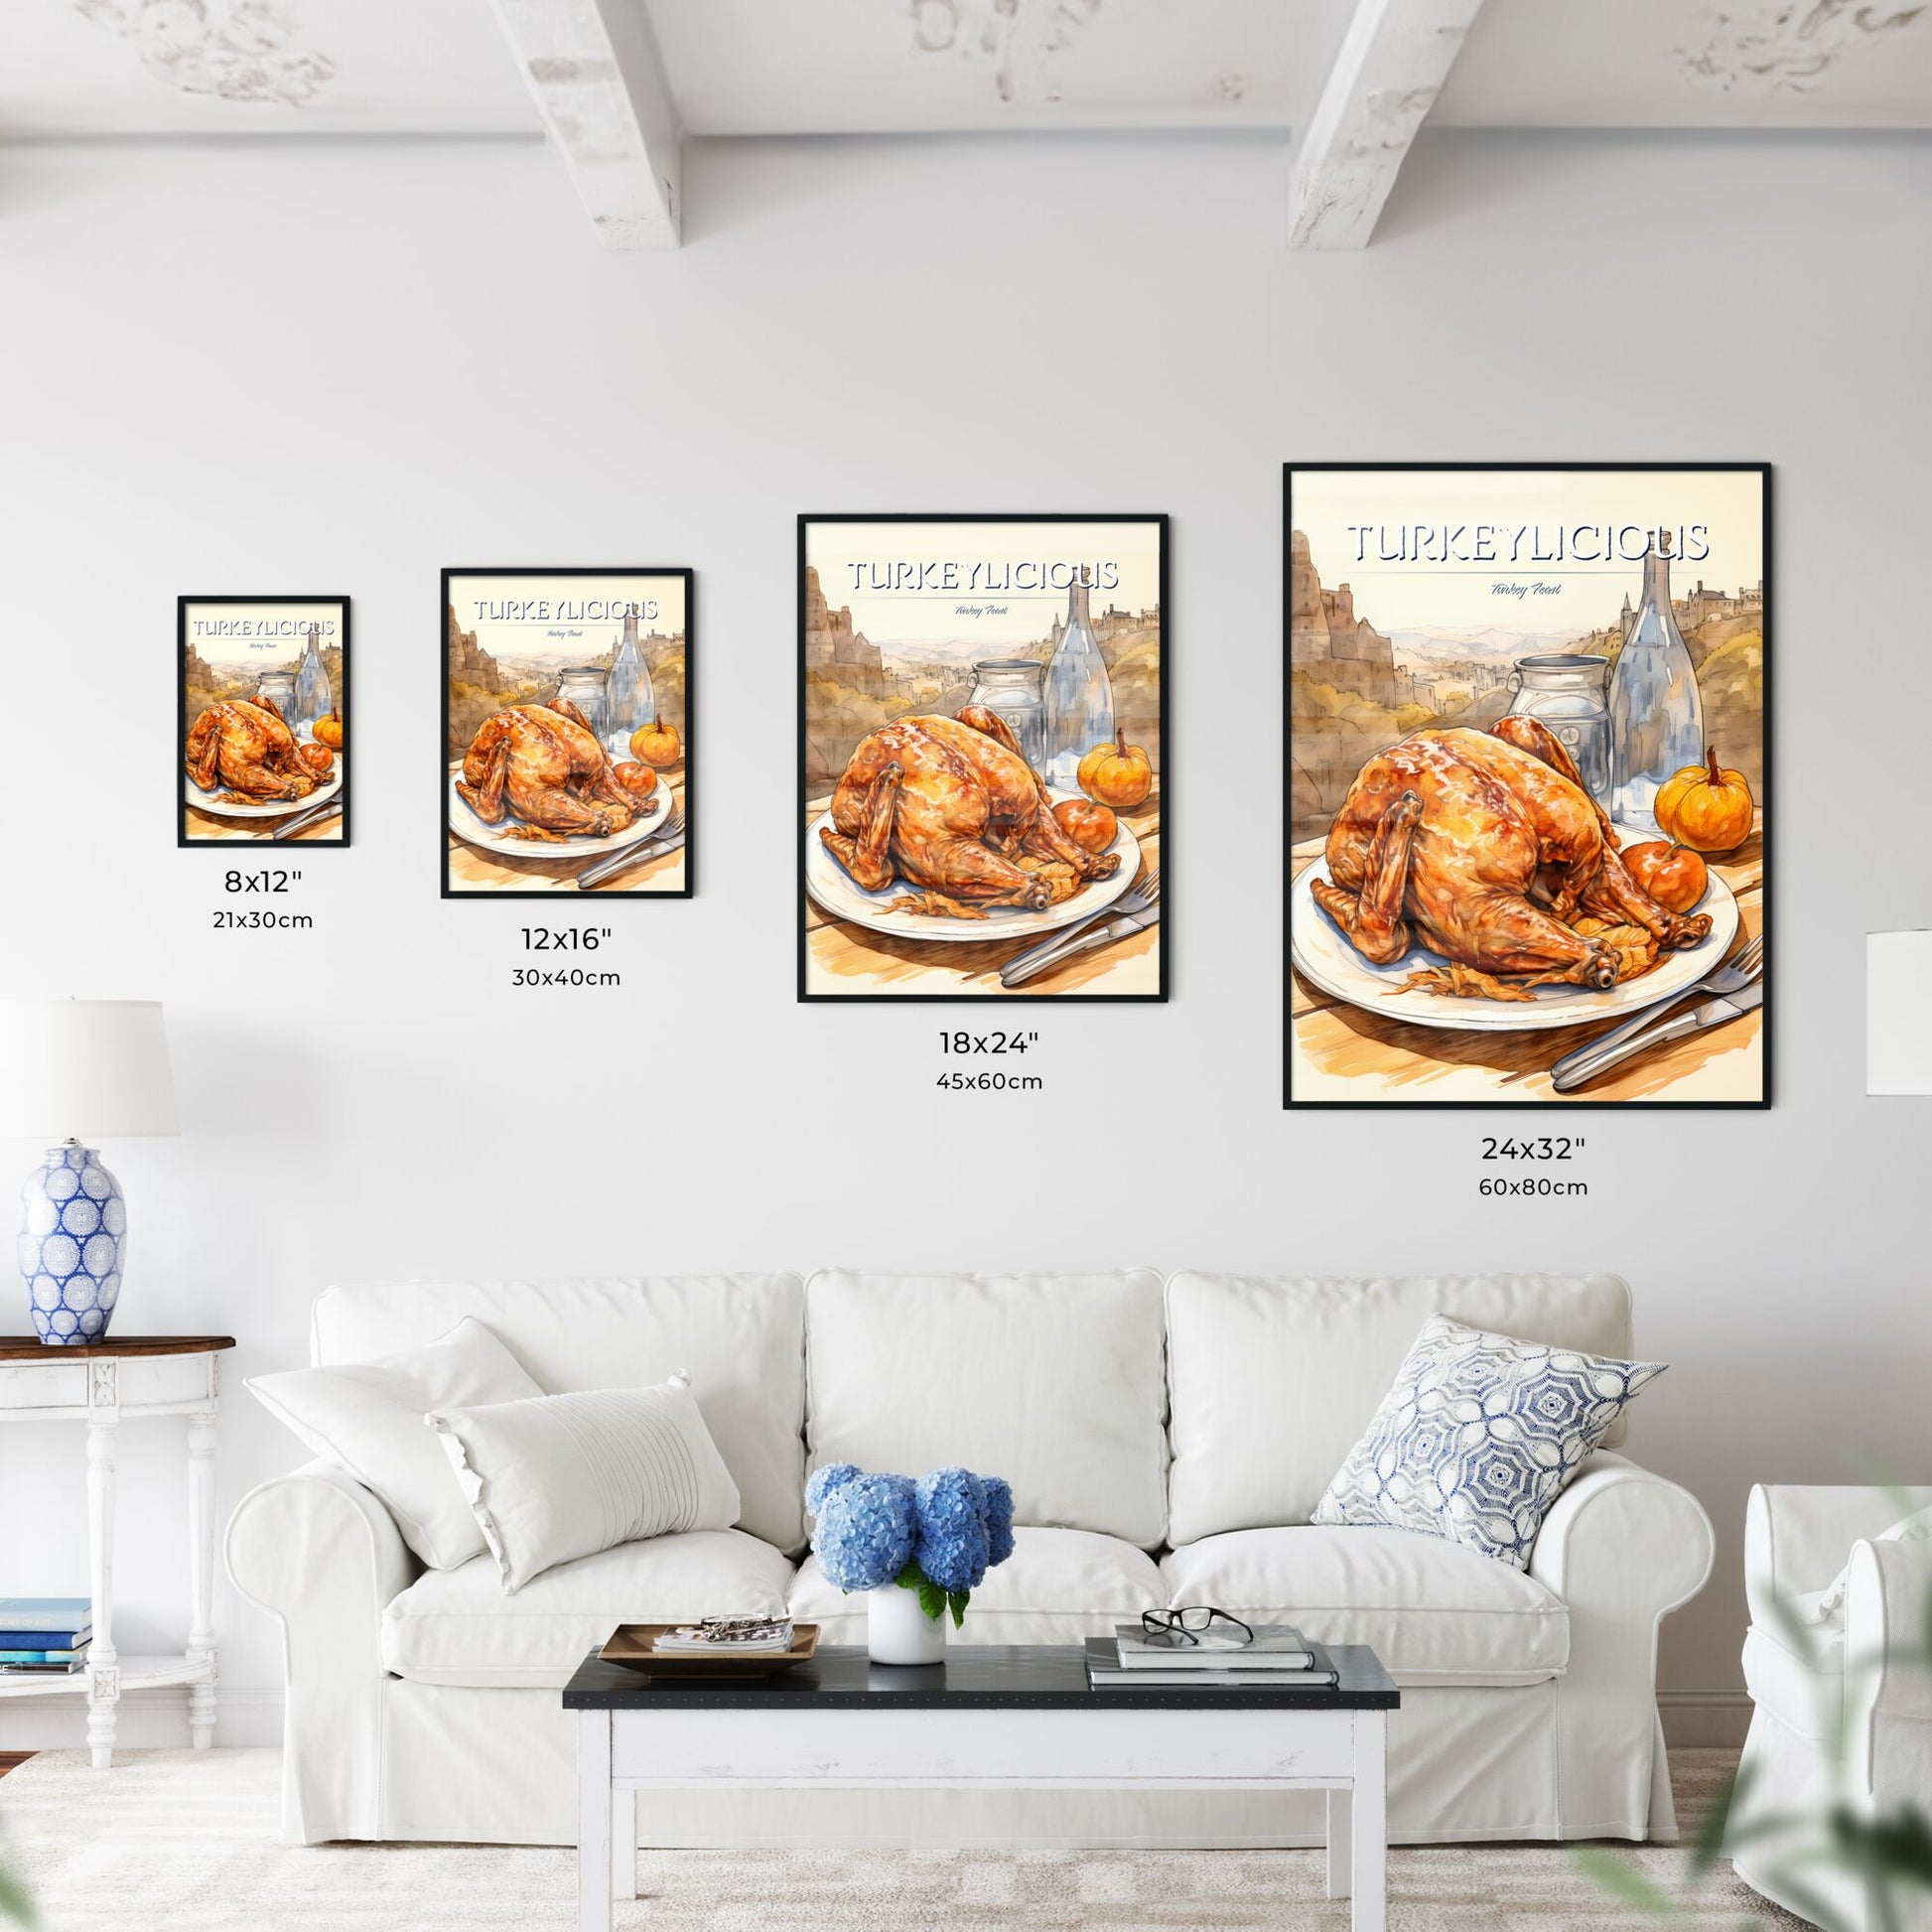 A Poster of Thanksgiving turkey - A Painting Of A Turkey On A Plate Default Title